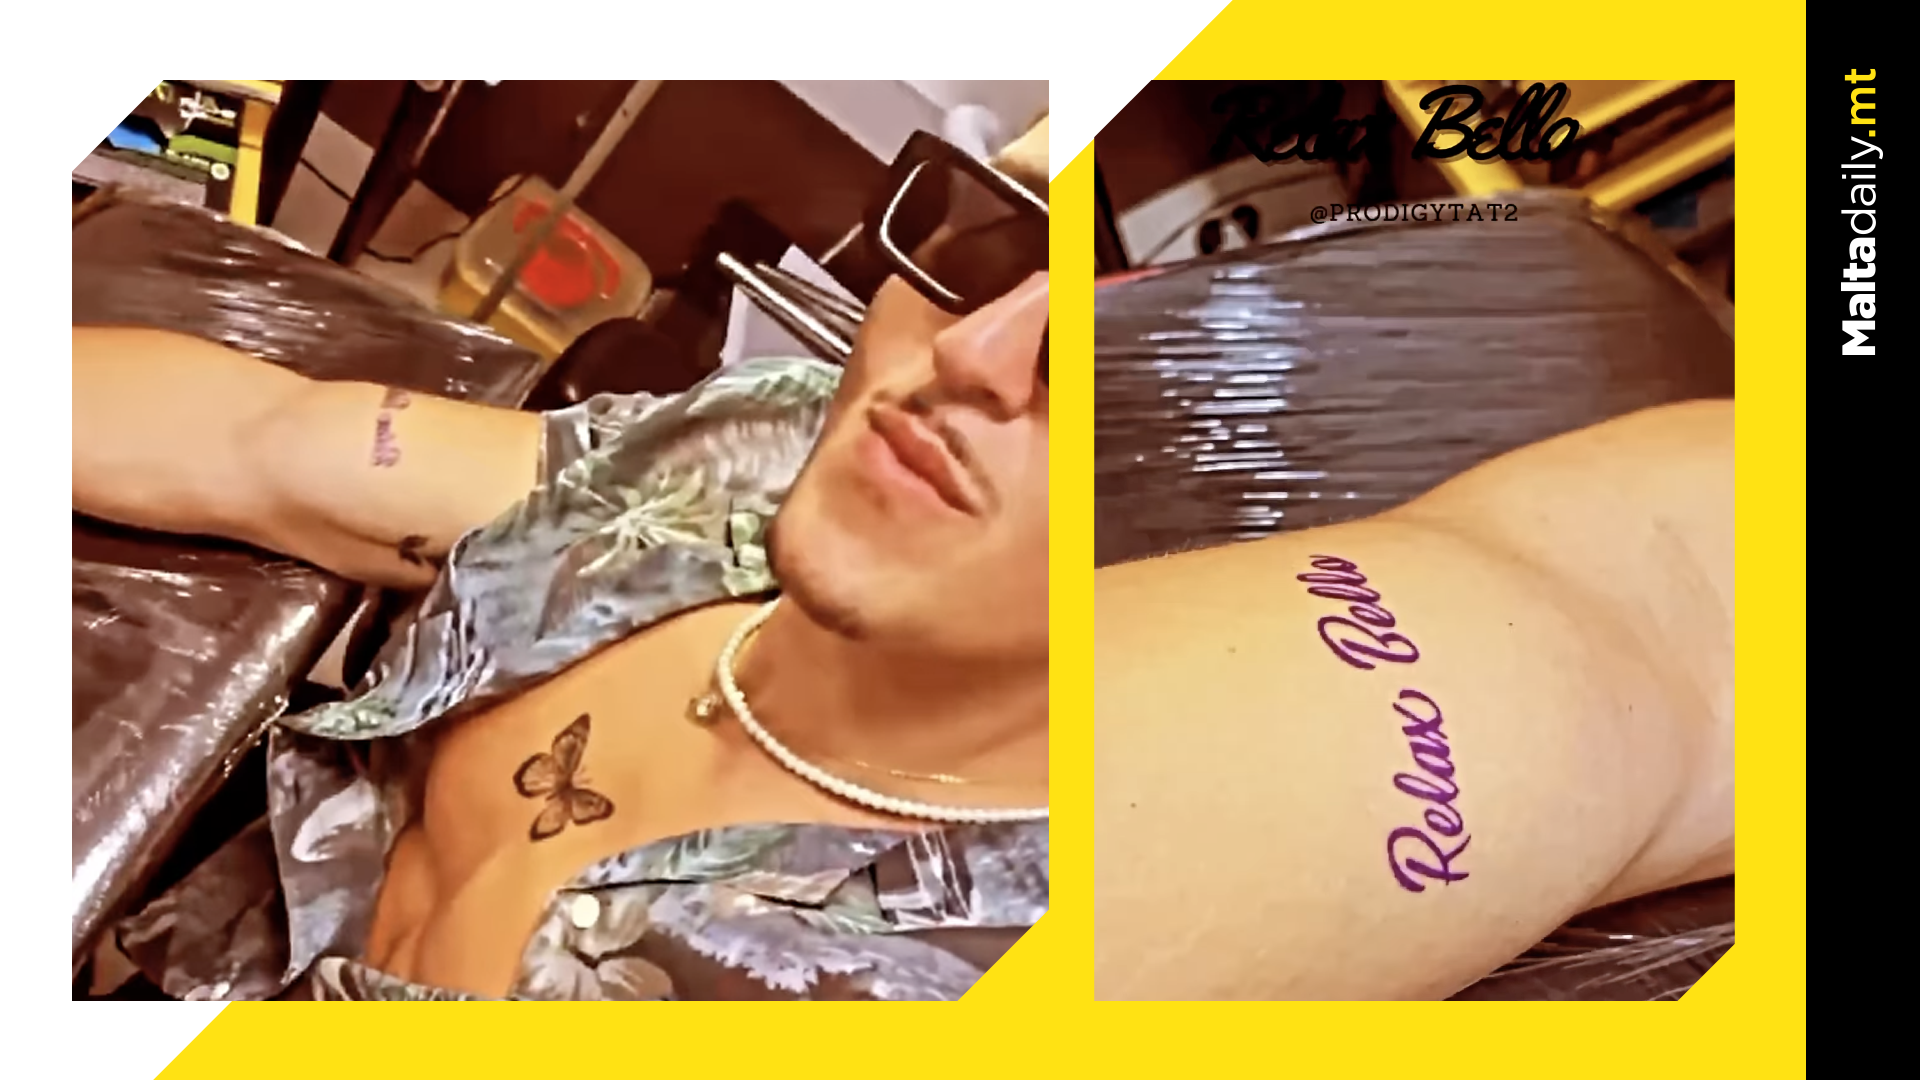 Dale Tattoos ‘Relax Bello’ On His Arm